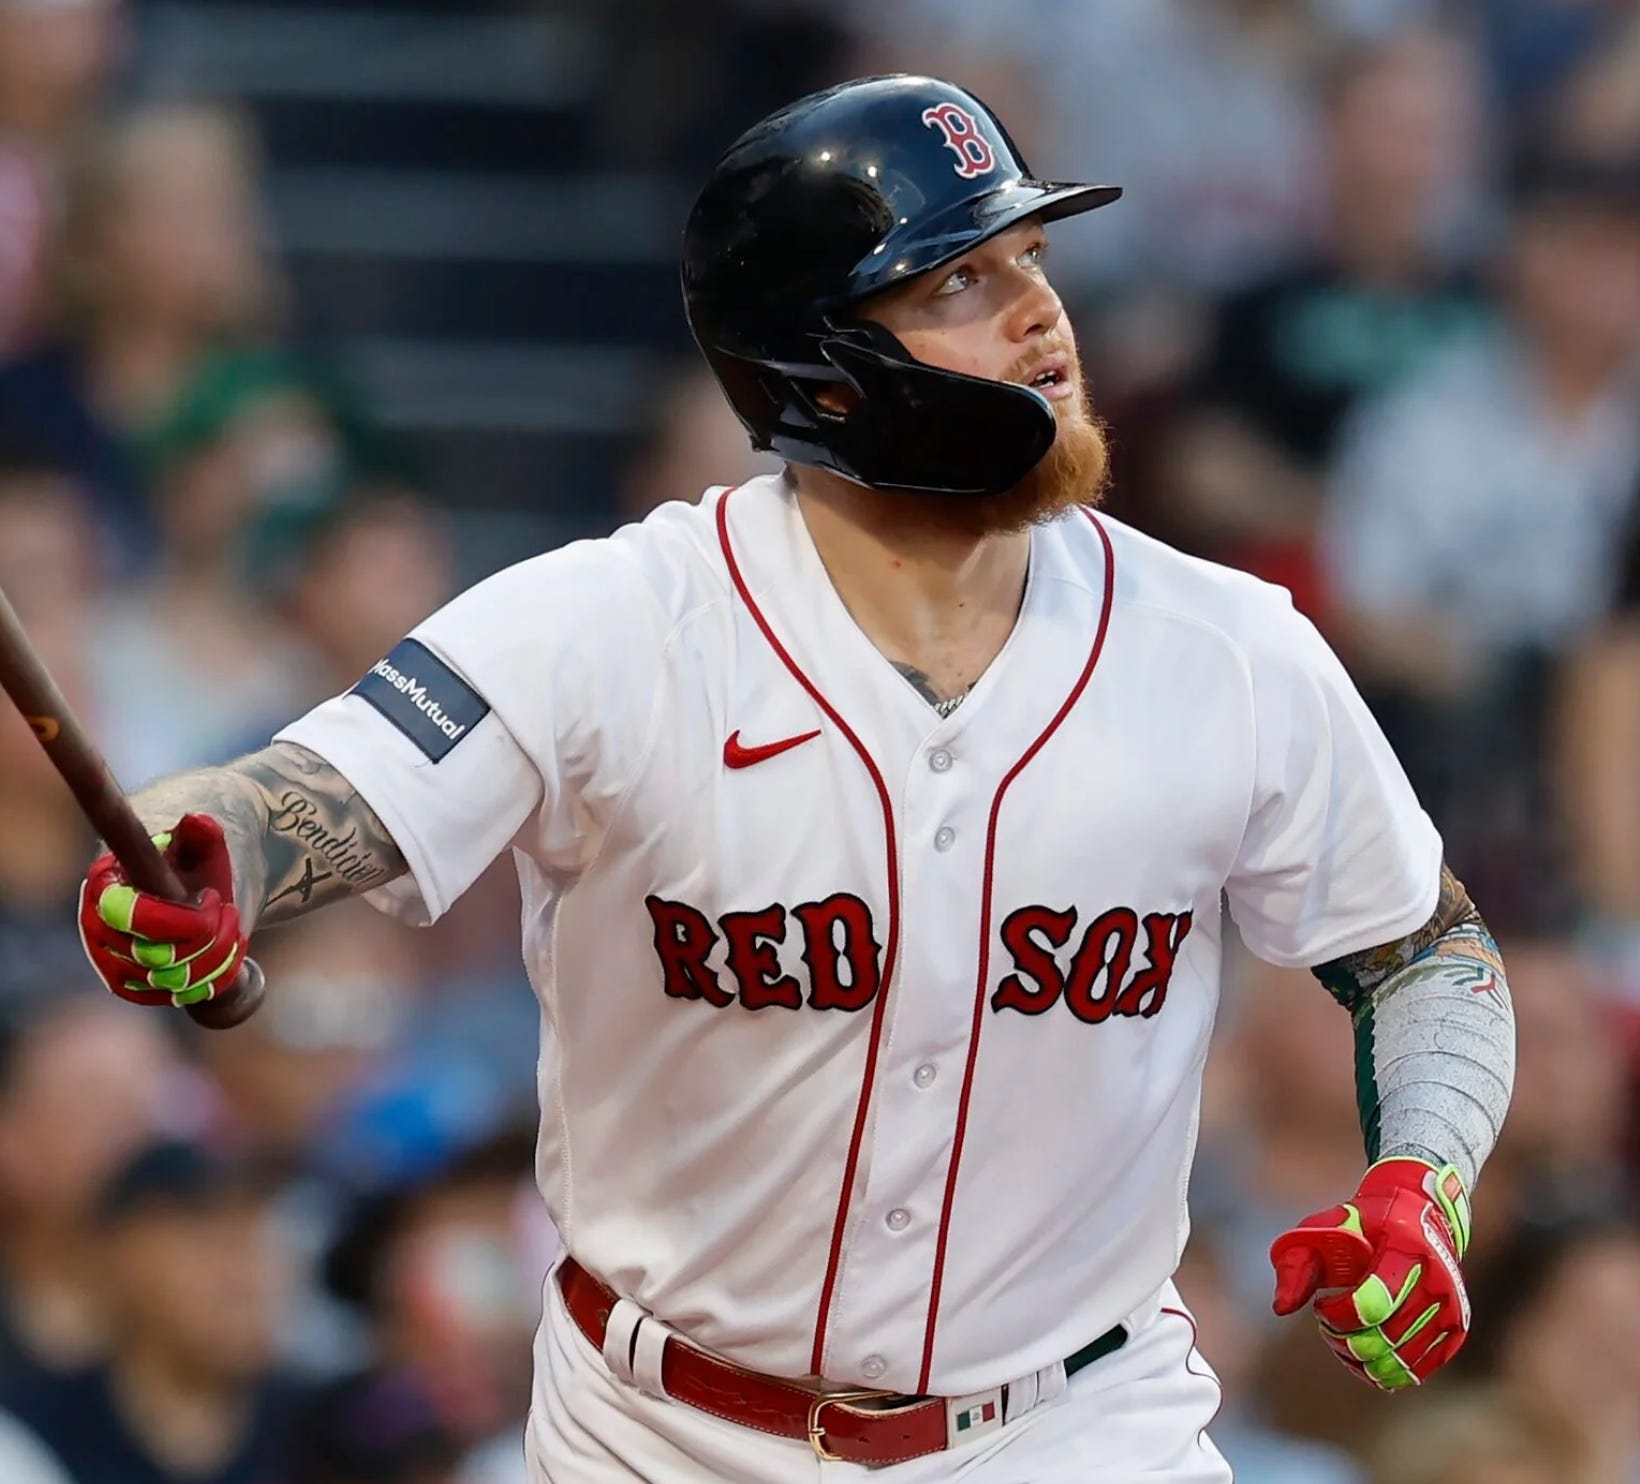 Boston Red Sox Announce MassMutual Patch on Jerseys Starting in